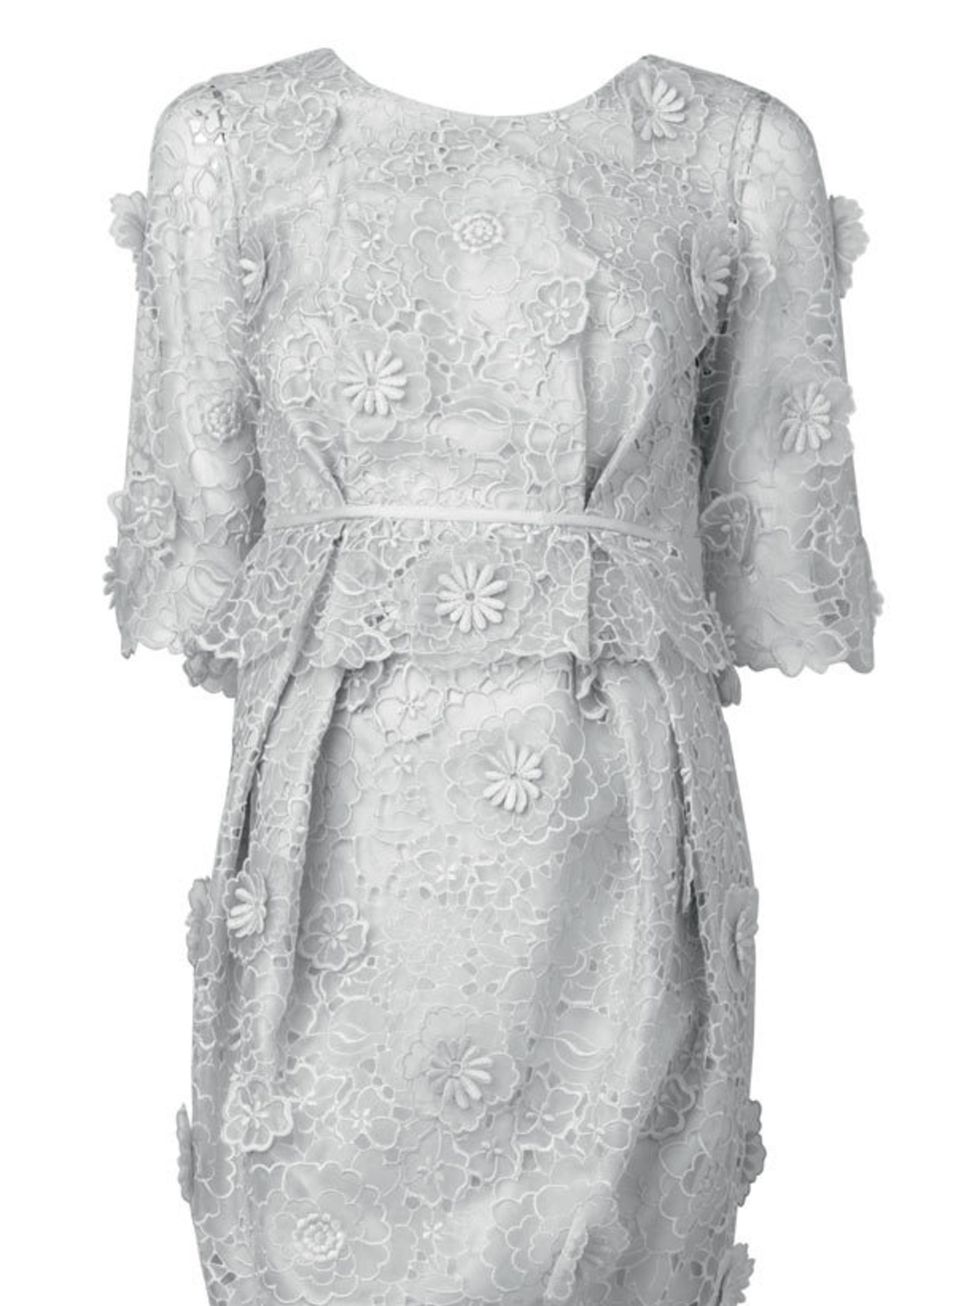 <p>Stella McCartney lace cut out dress, £2,490, at Selfridges, for stockists call 0800 123 400</p>